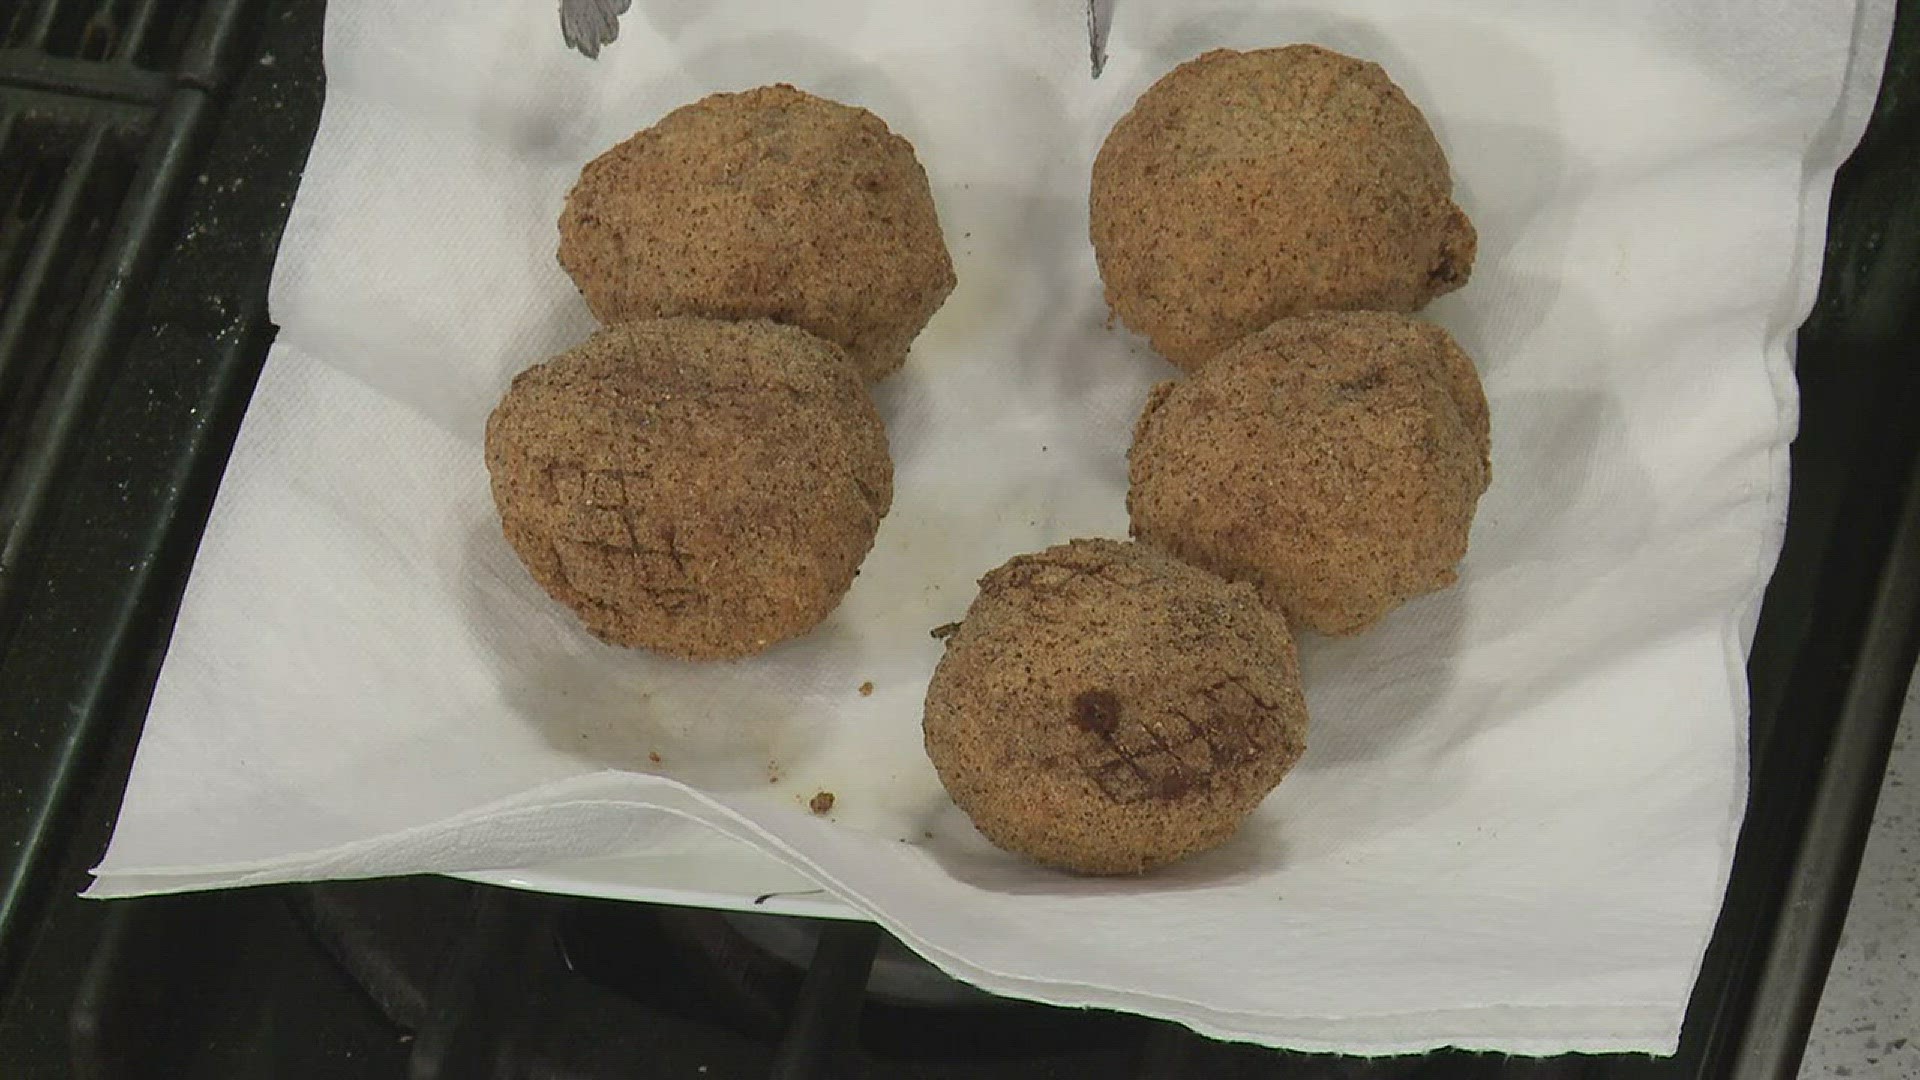 Learning to make Fried Boudin Balls from scratch